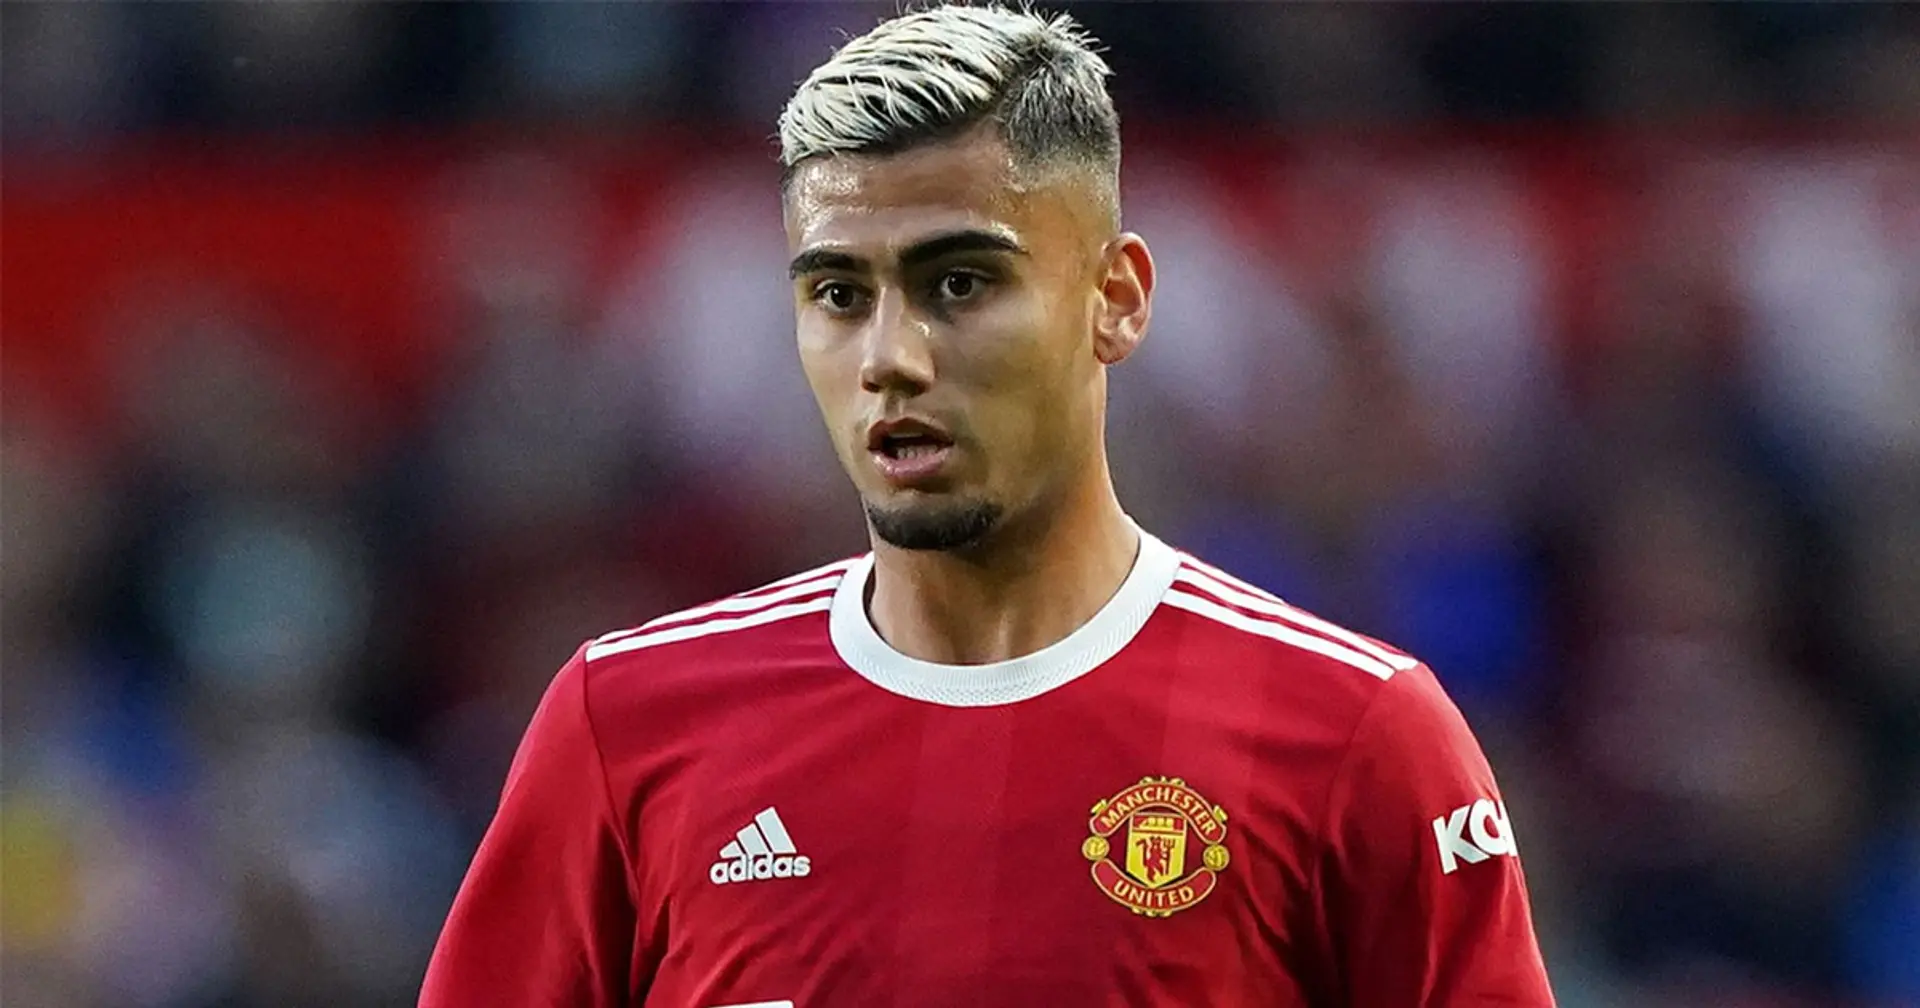 Andreas Pereira 'told' he'll be given chance to impress Ten Hag despite transfer interest from 2 clubs